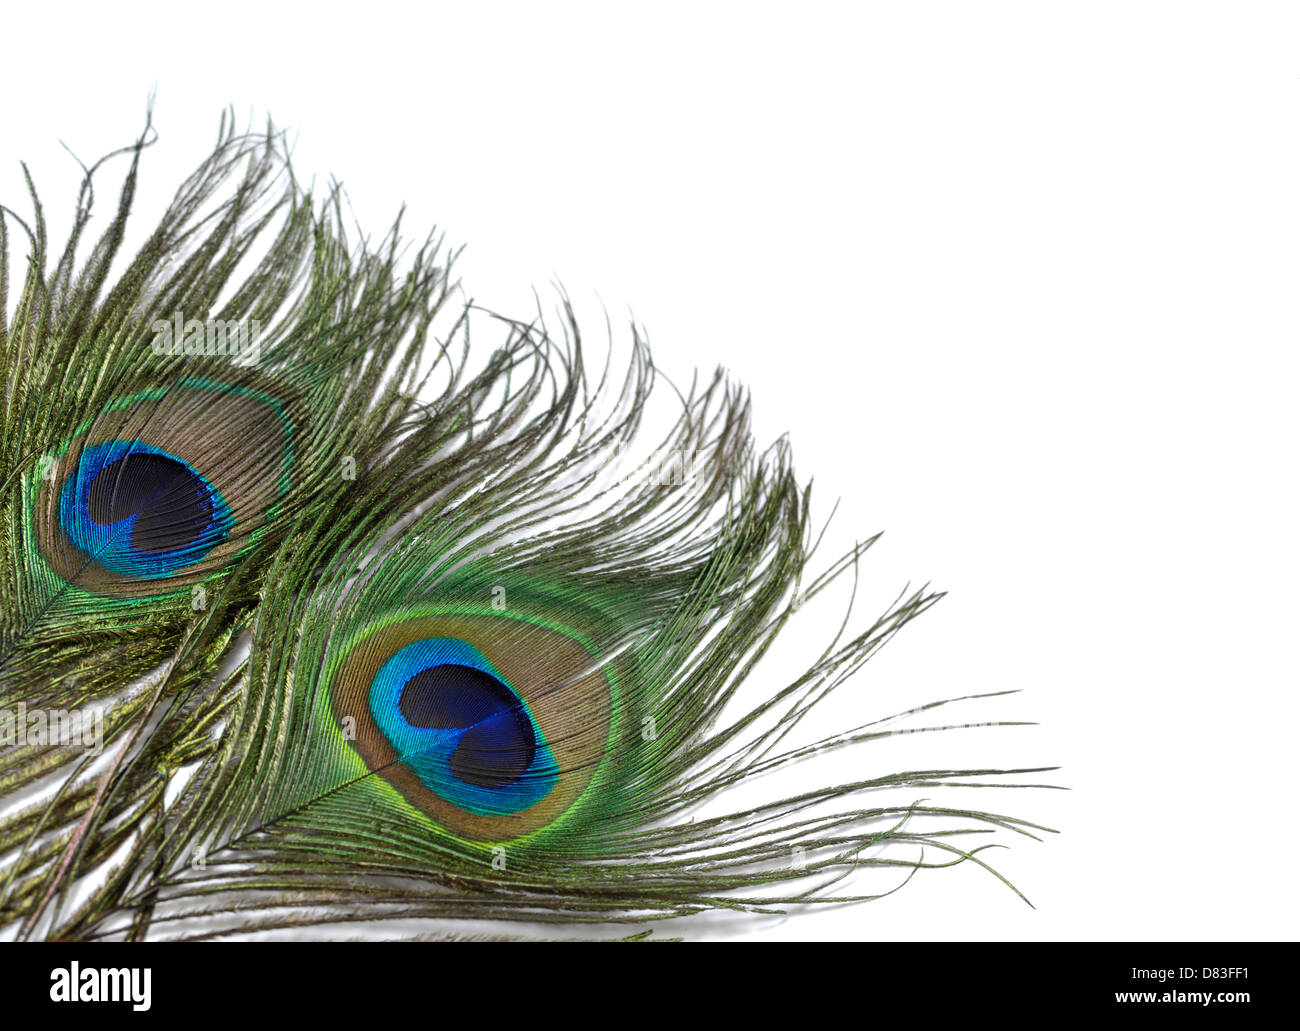 Colorful peacock feathers closeup isolated on white background Stock Photo